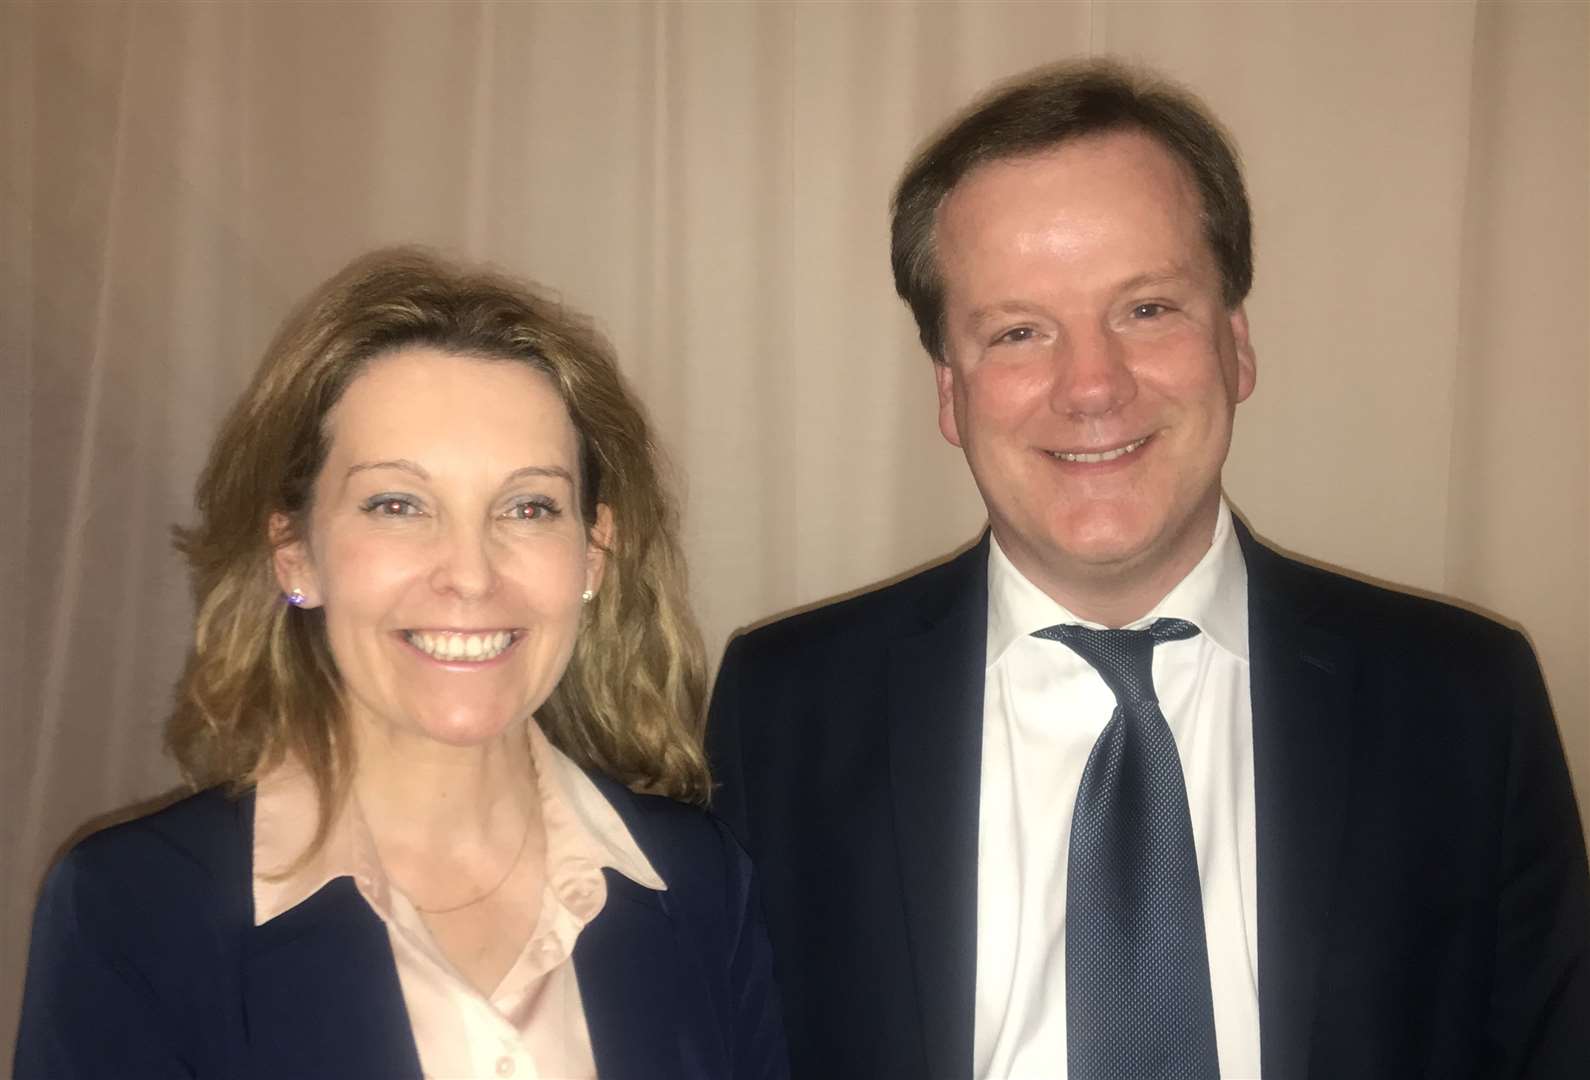 Natalie Elphicke after her election win with husband and former MP Charlie